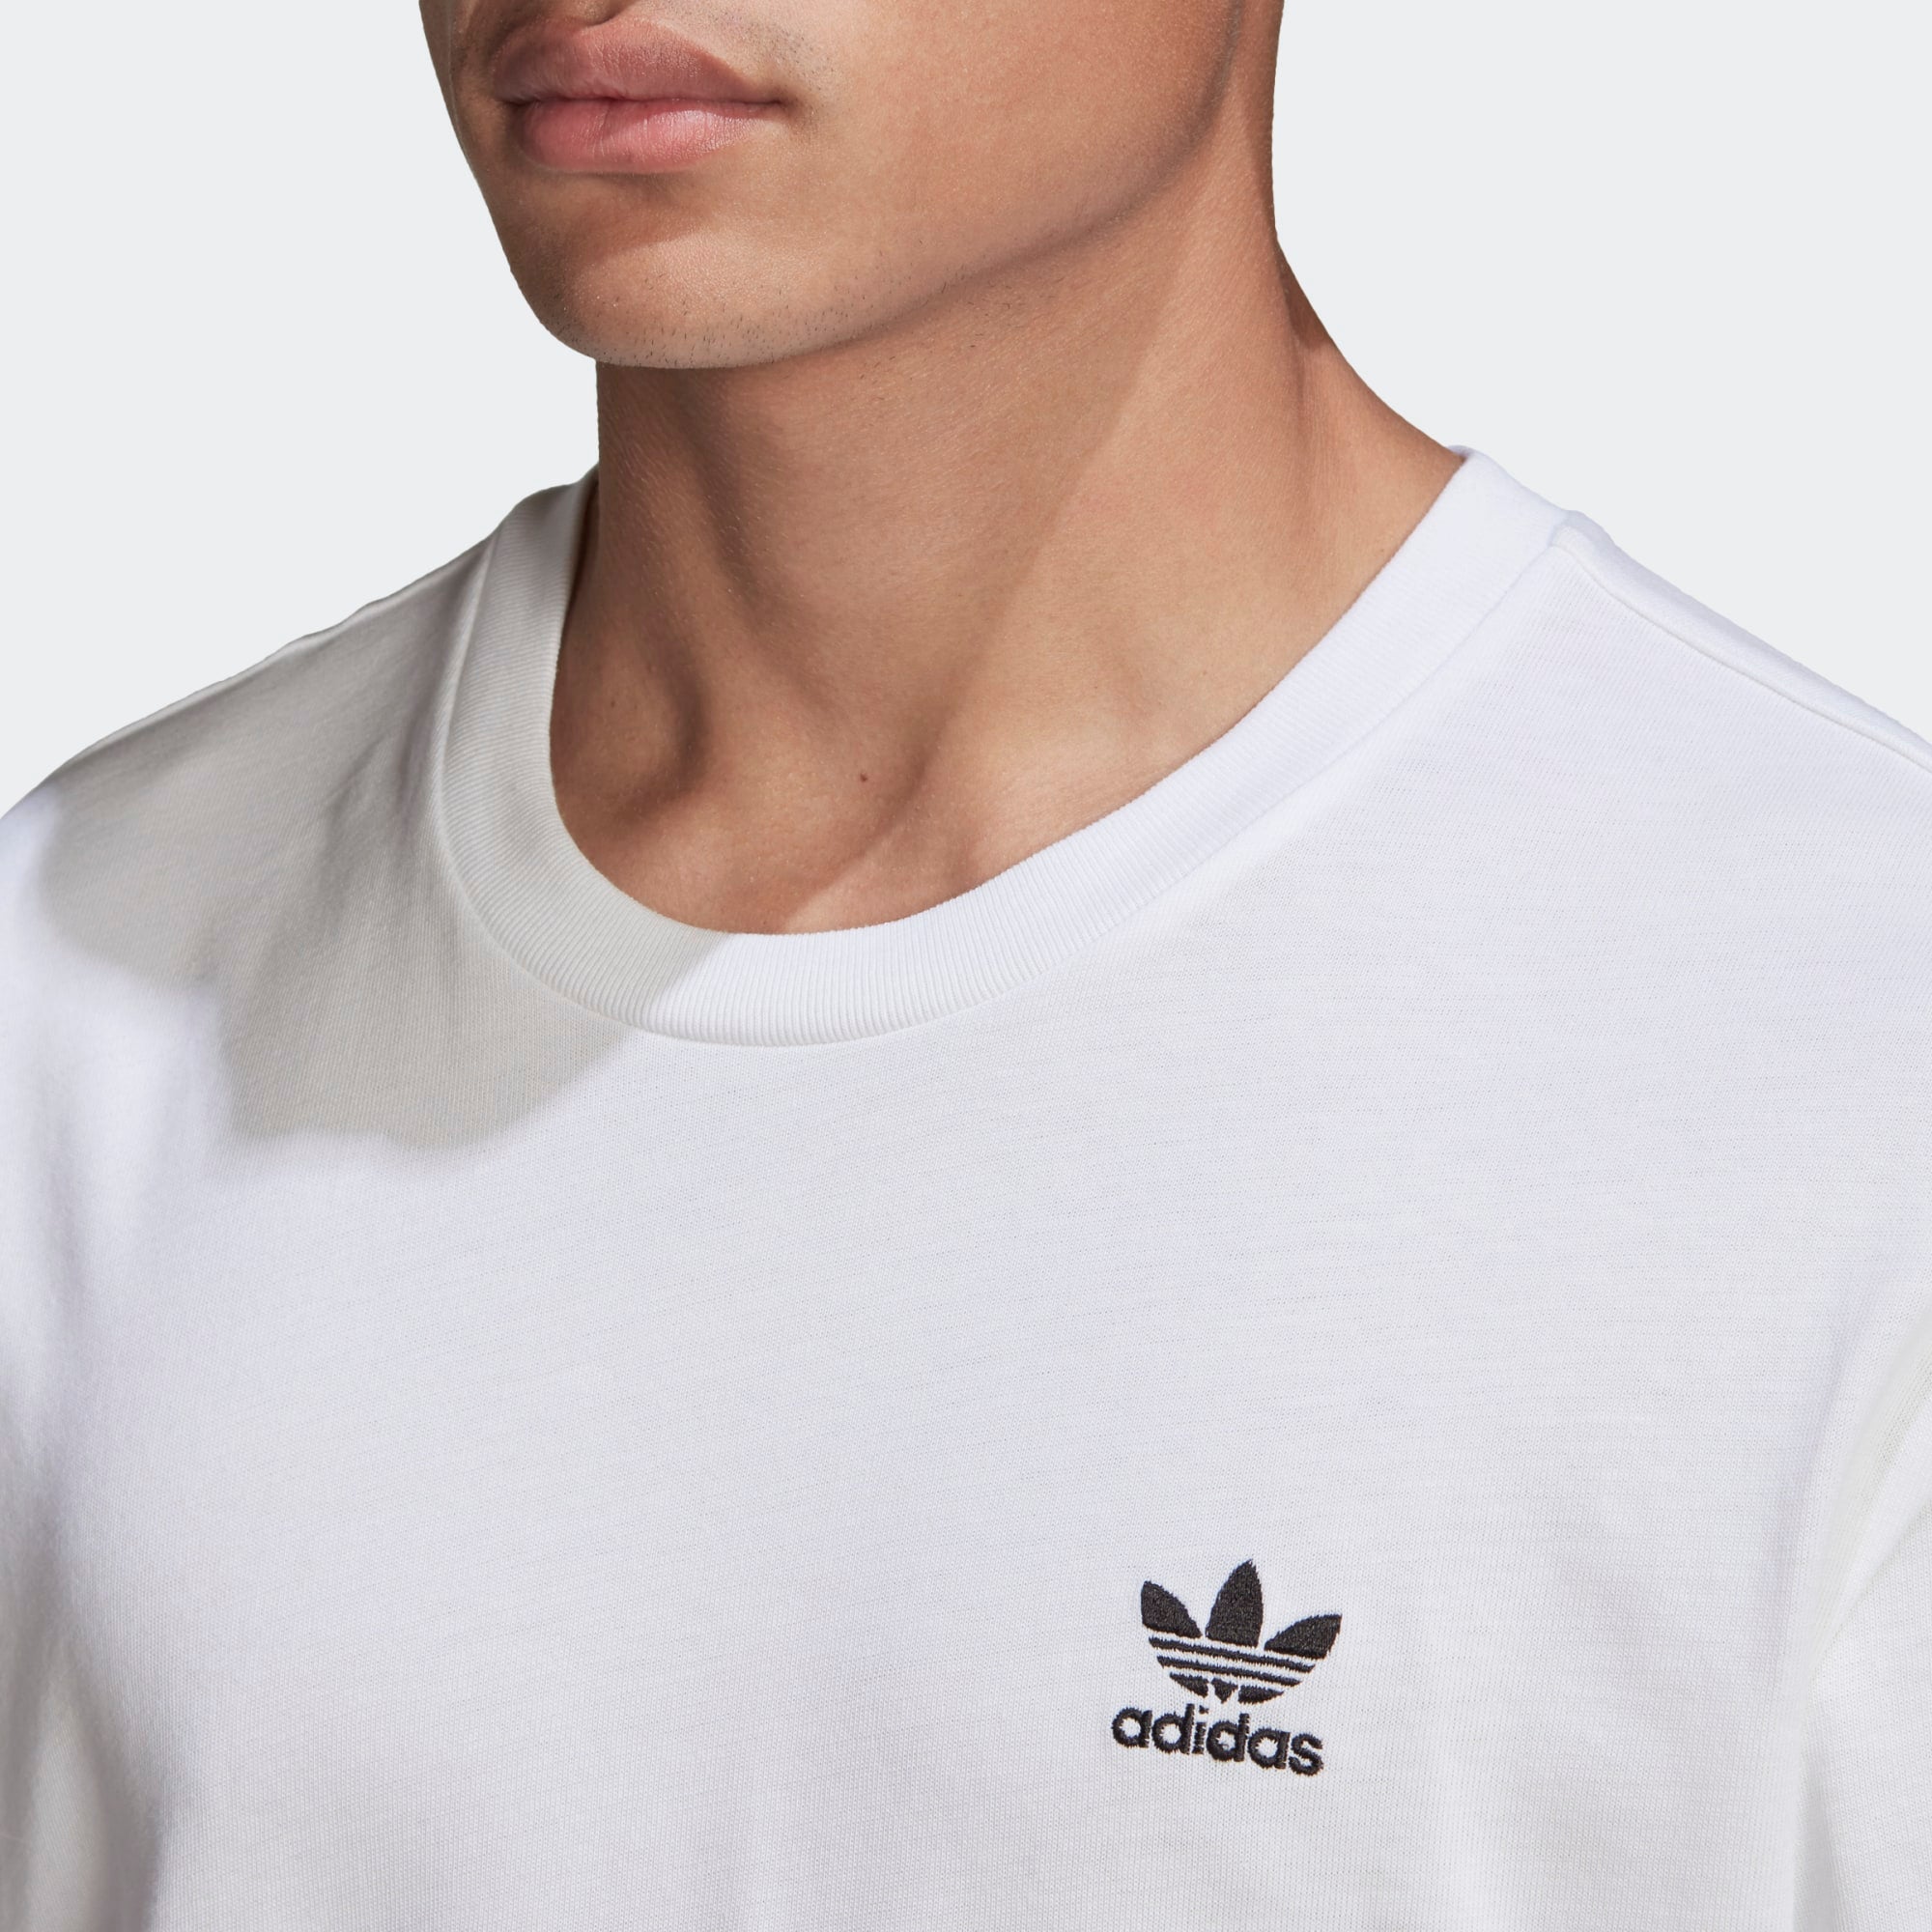 Logo (White)(GN3453) Classics Trilogy – Tee Boxy Adidas Embroidered Merch PH Adicolor